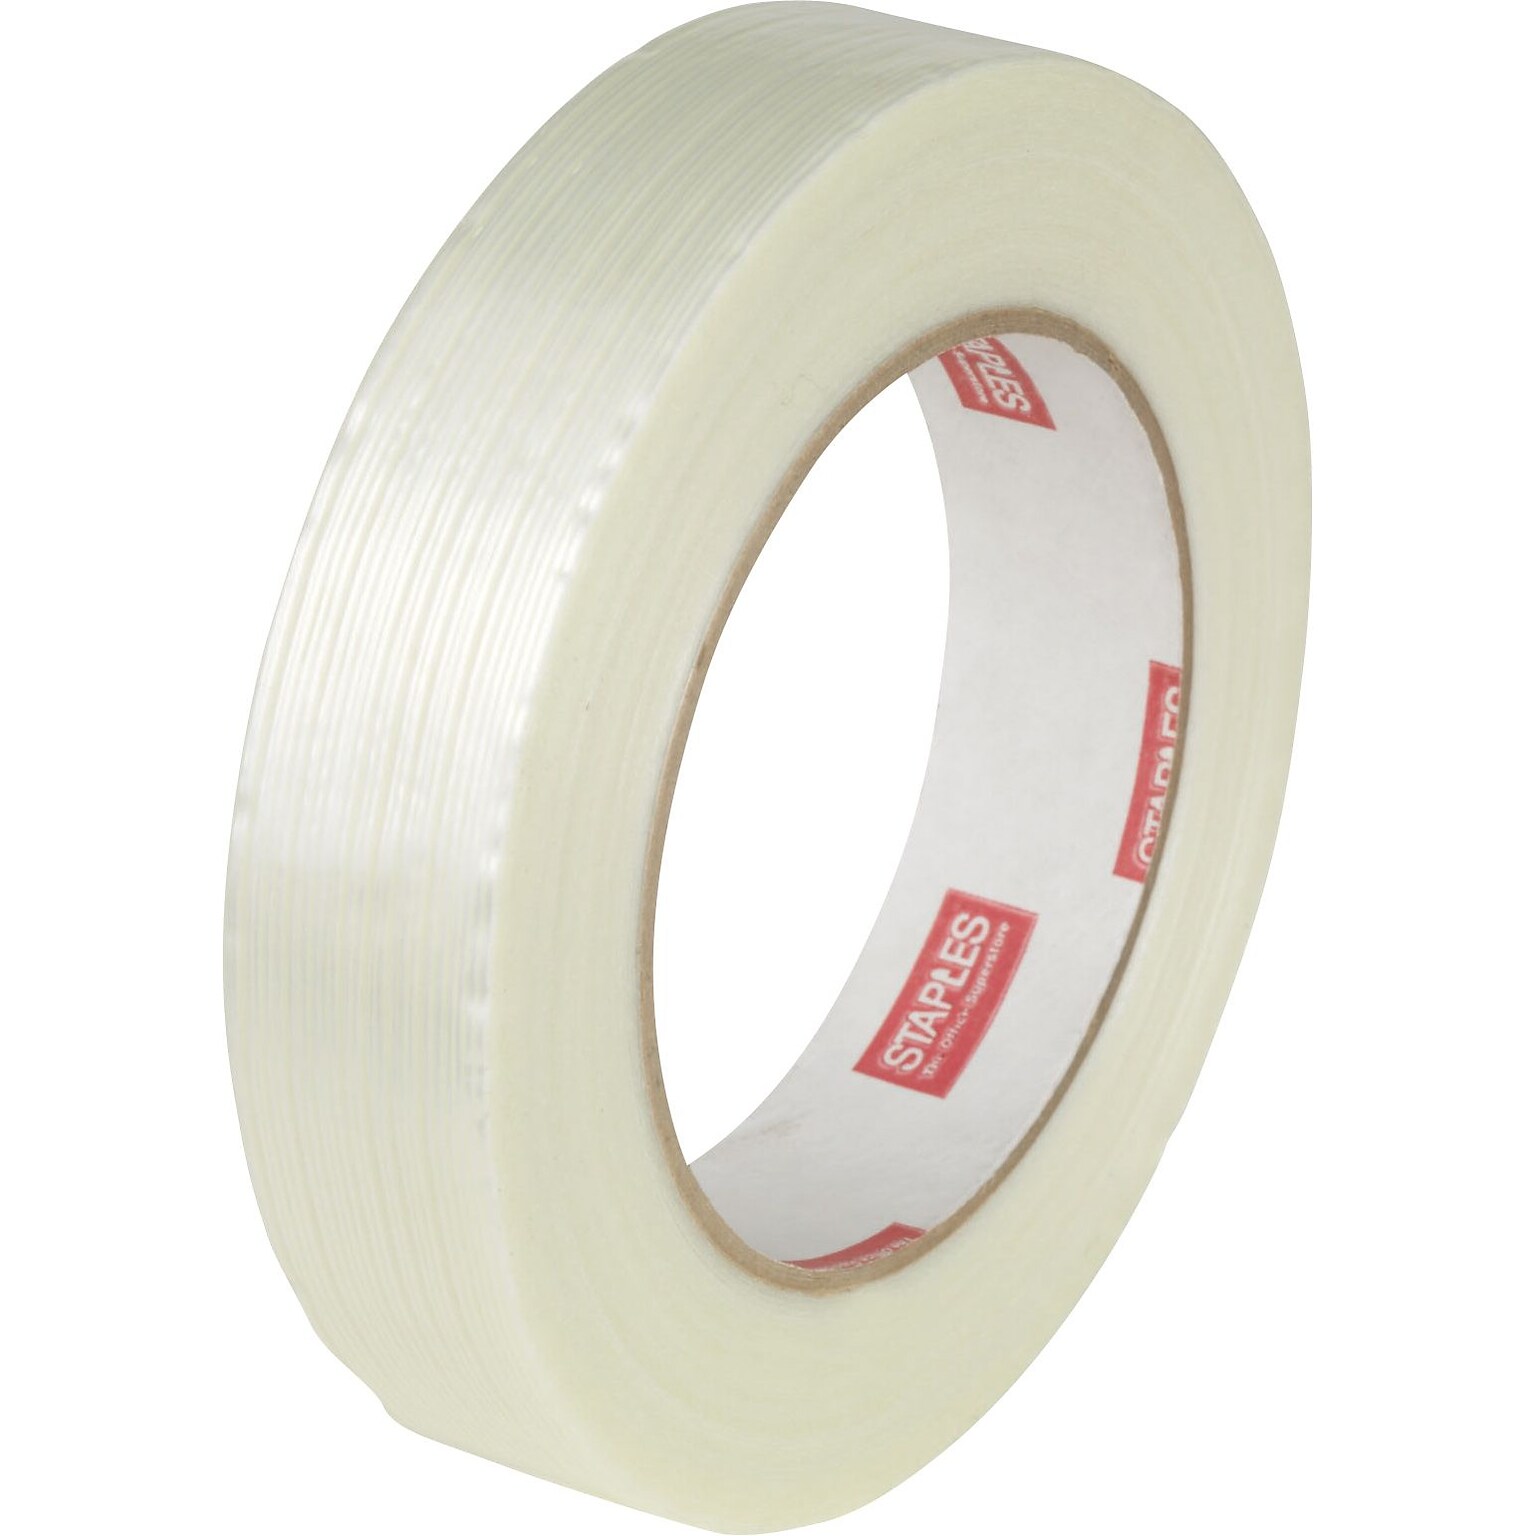 Staples® 4 mil. Filament Tape, 0.9 x 60 yards, 3 Core, 12/Pack (52946)